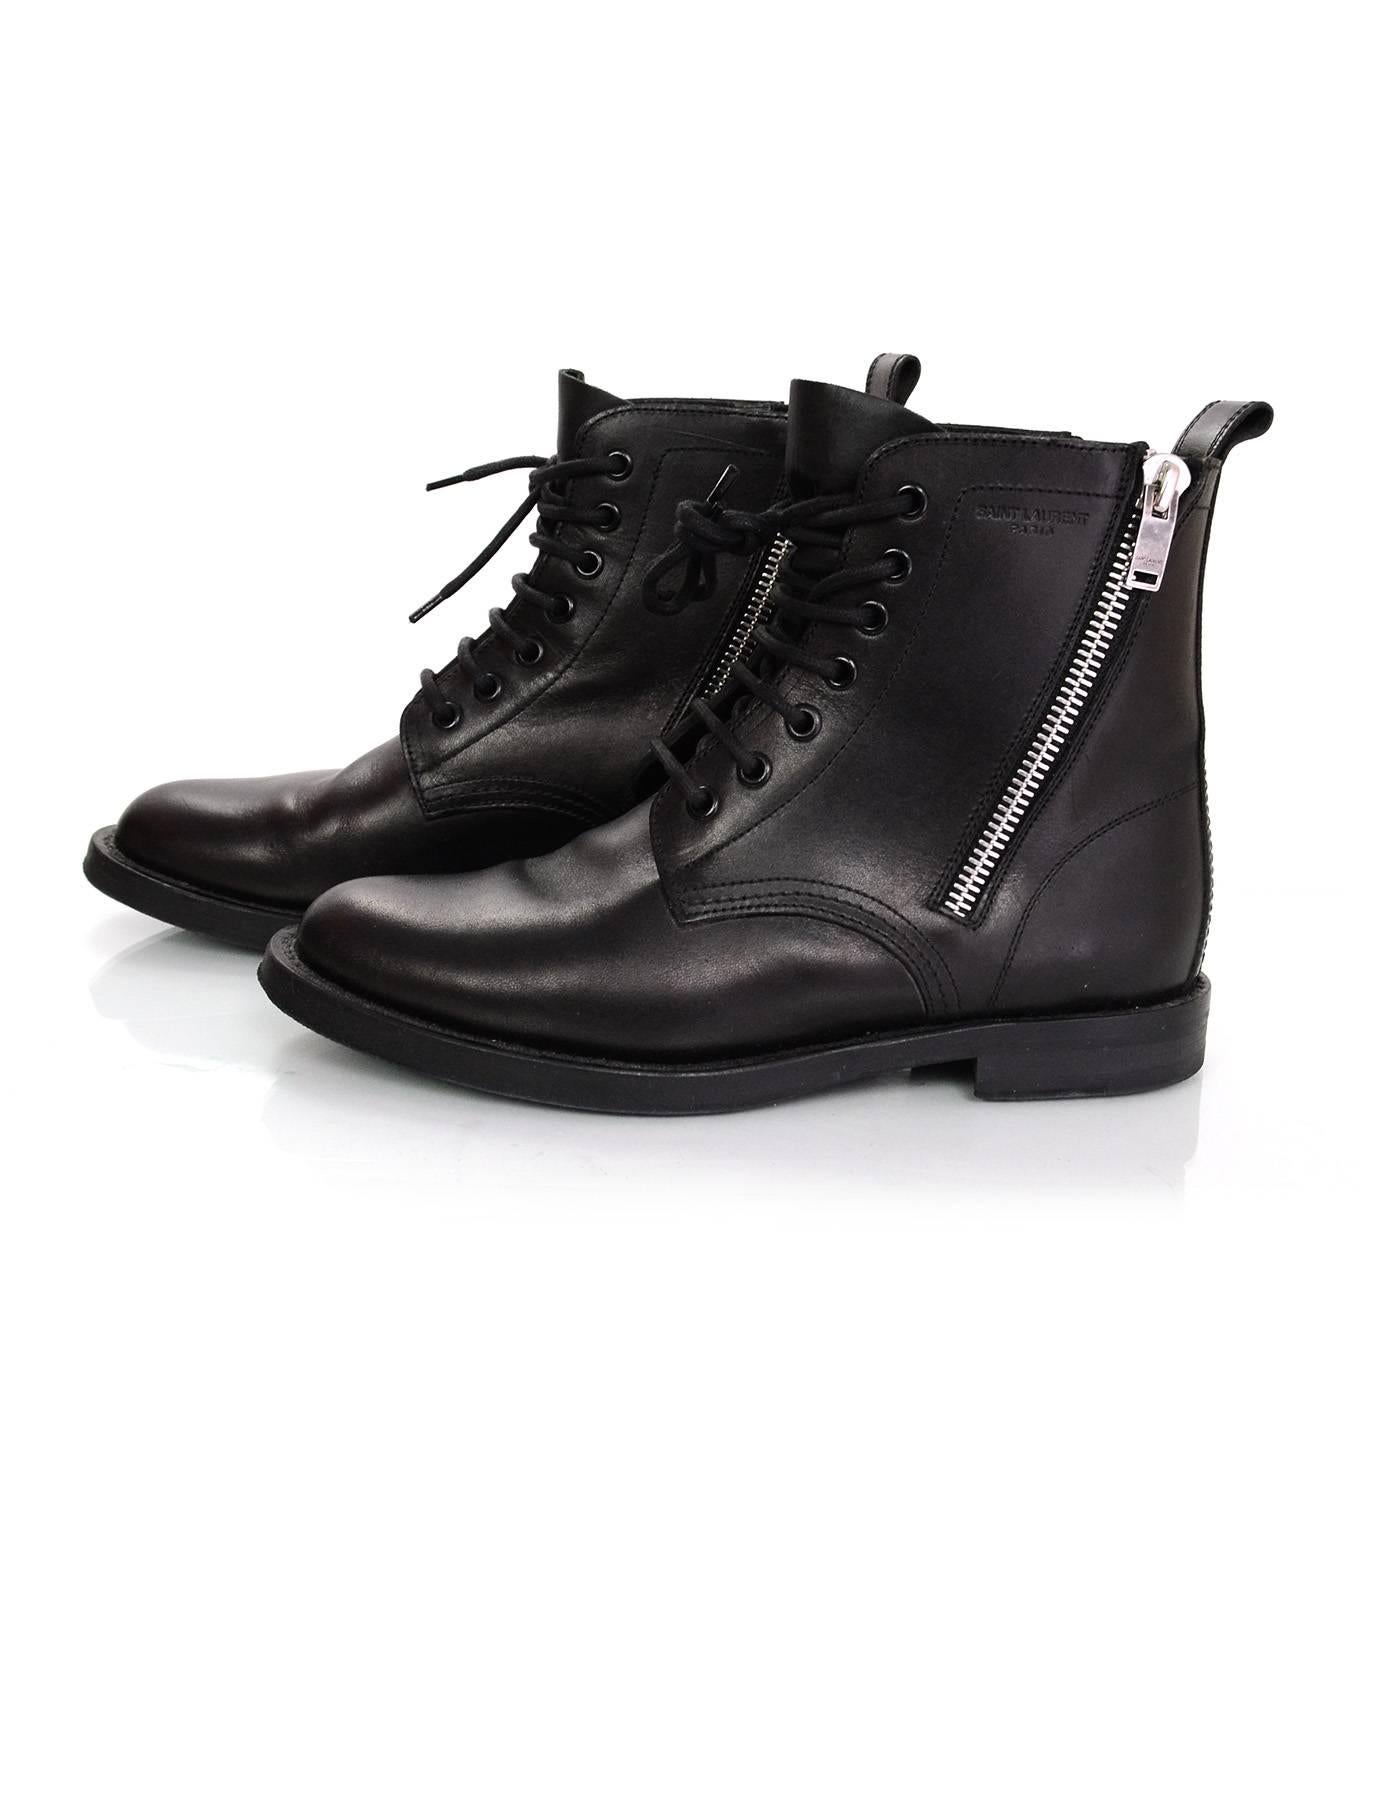 Saint Laurent Black Leather Combat Ankle Boots Sz 38.5 rt. $1, 295 In Excellent Condition In New York, NY